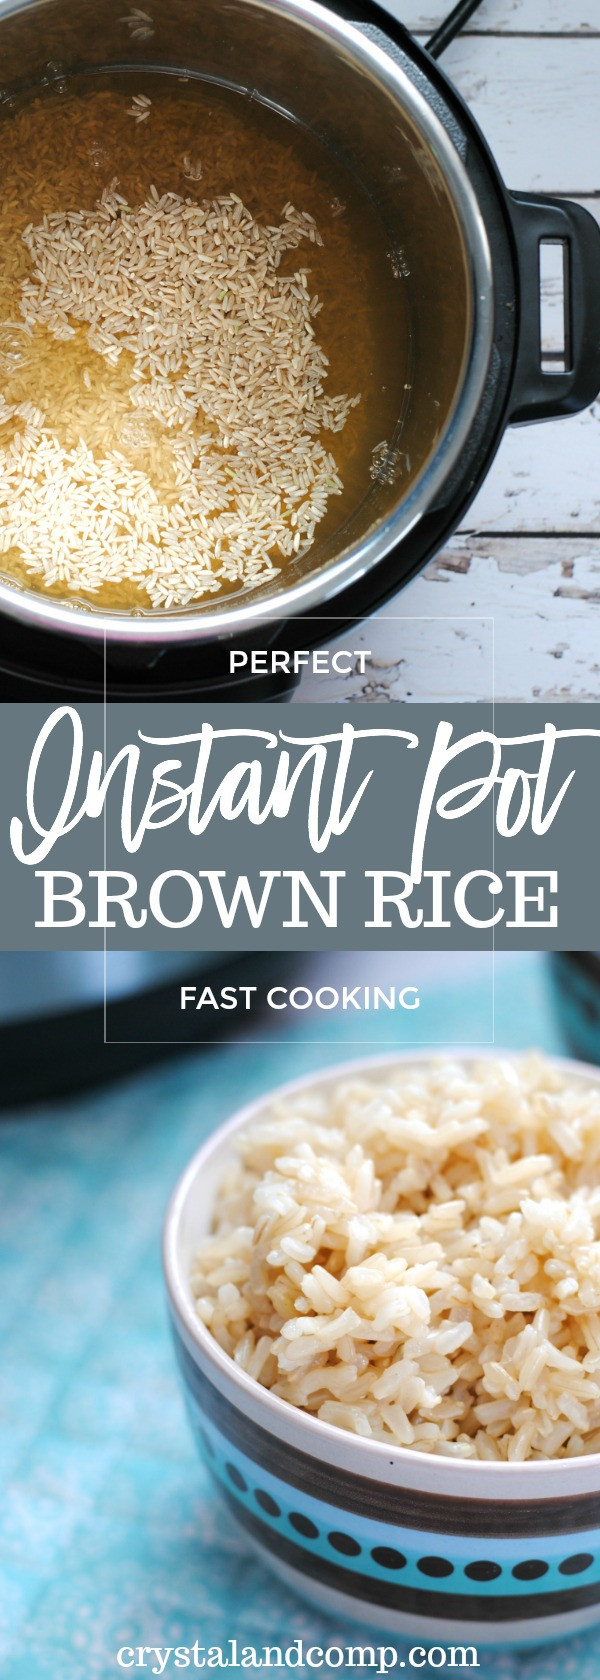 Brown Rice Instant Pot
 How to Make Brown Rice in the Instant Pot